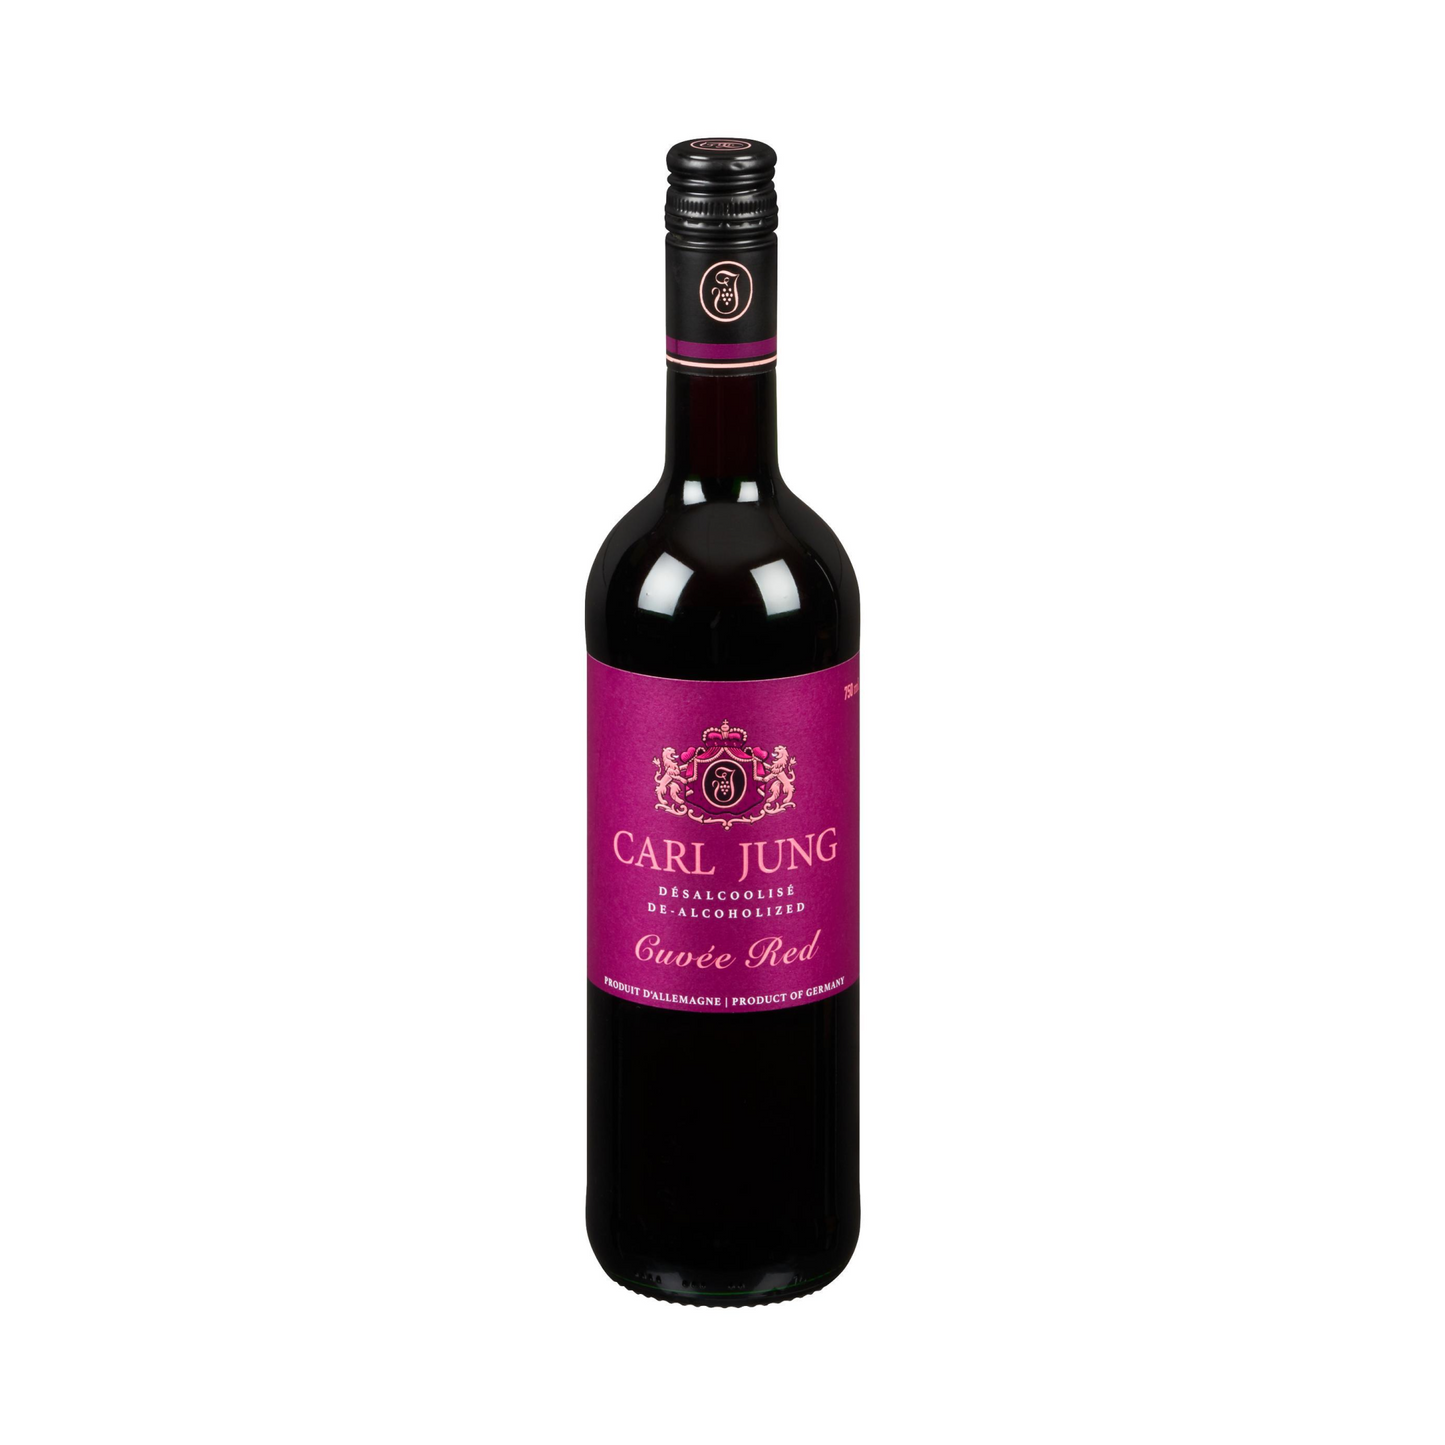 Carl Jung Nonalcoholic Guvée Red 750ml